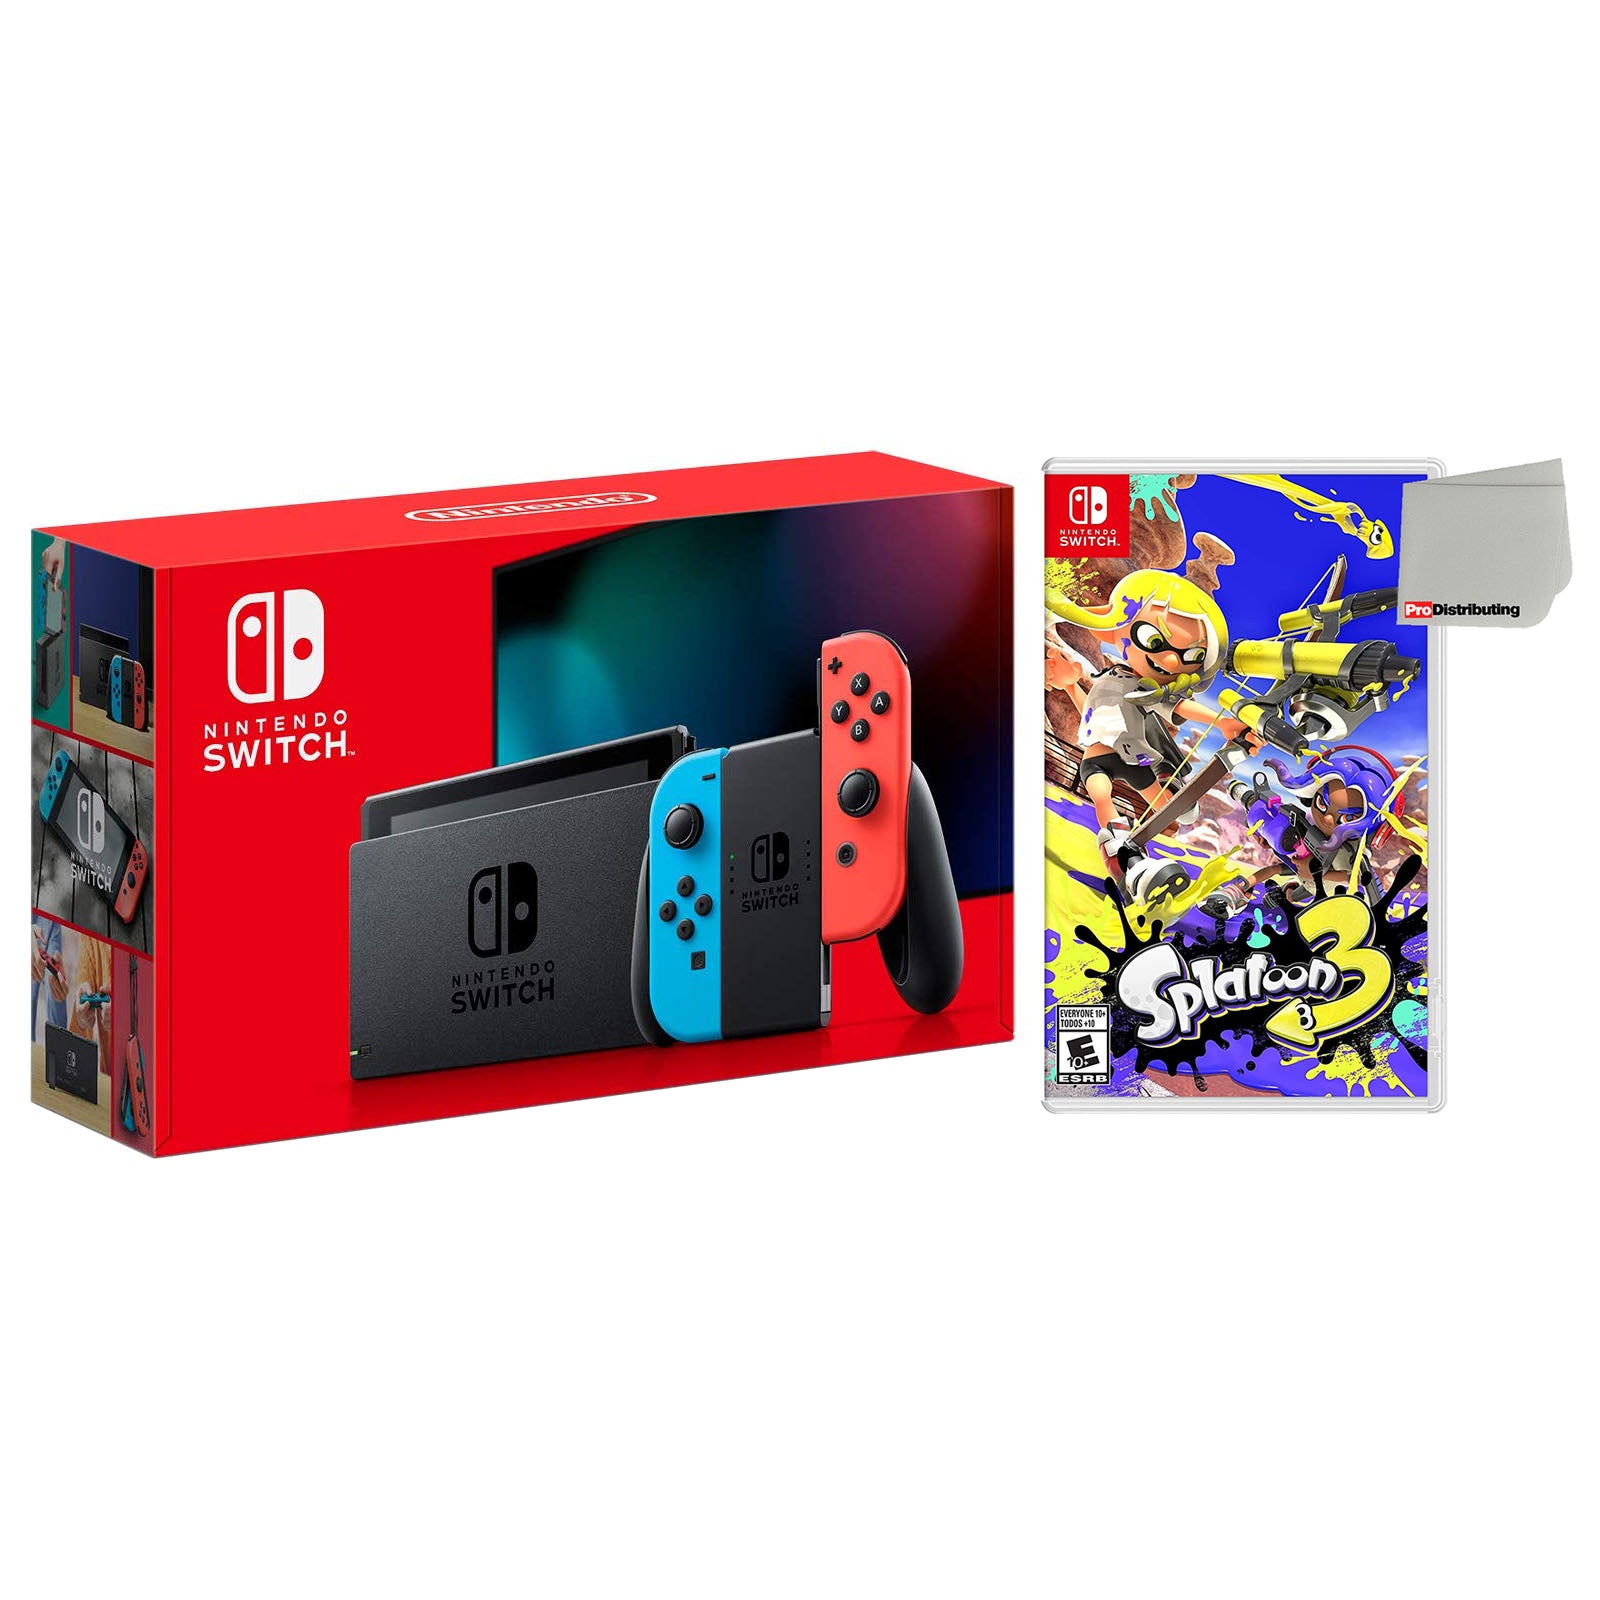 Nintendo Switch 32GB Console with Neon Red/Blue Joy-Con and Splatoon 3 Bundle - Pro-Distributing